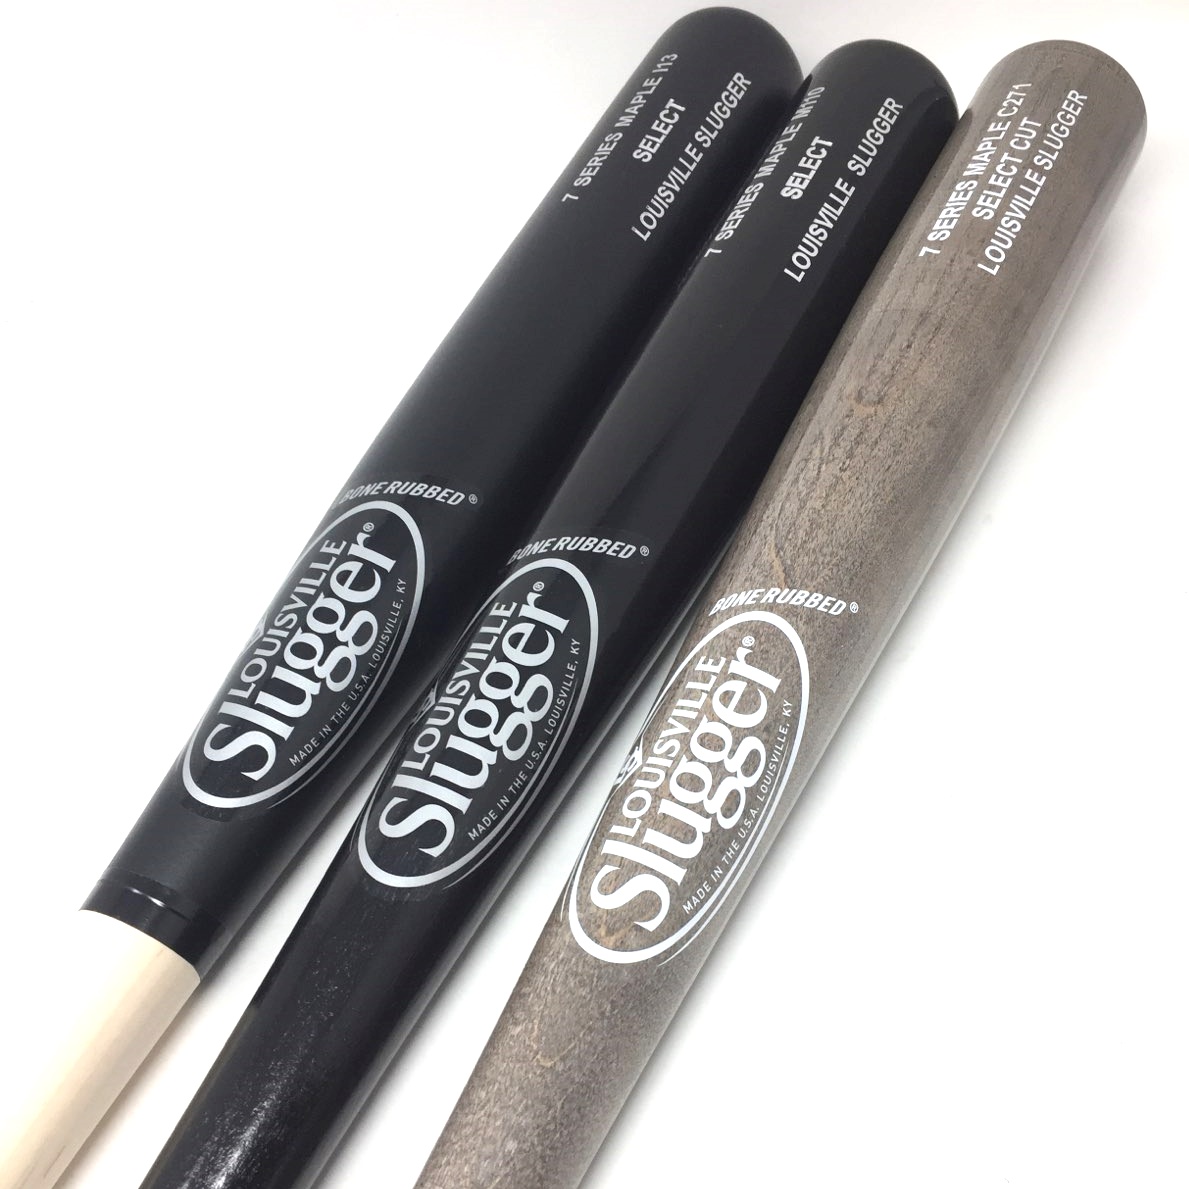 33 Inch Series 7 Maple Wood Baseball Bats from Louisville Slugger. Cupped. 1 M110, 1 C271, and 113. 3 bats in total.